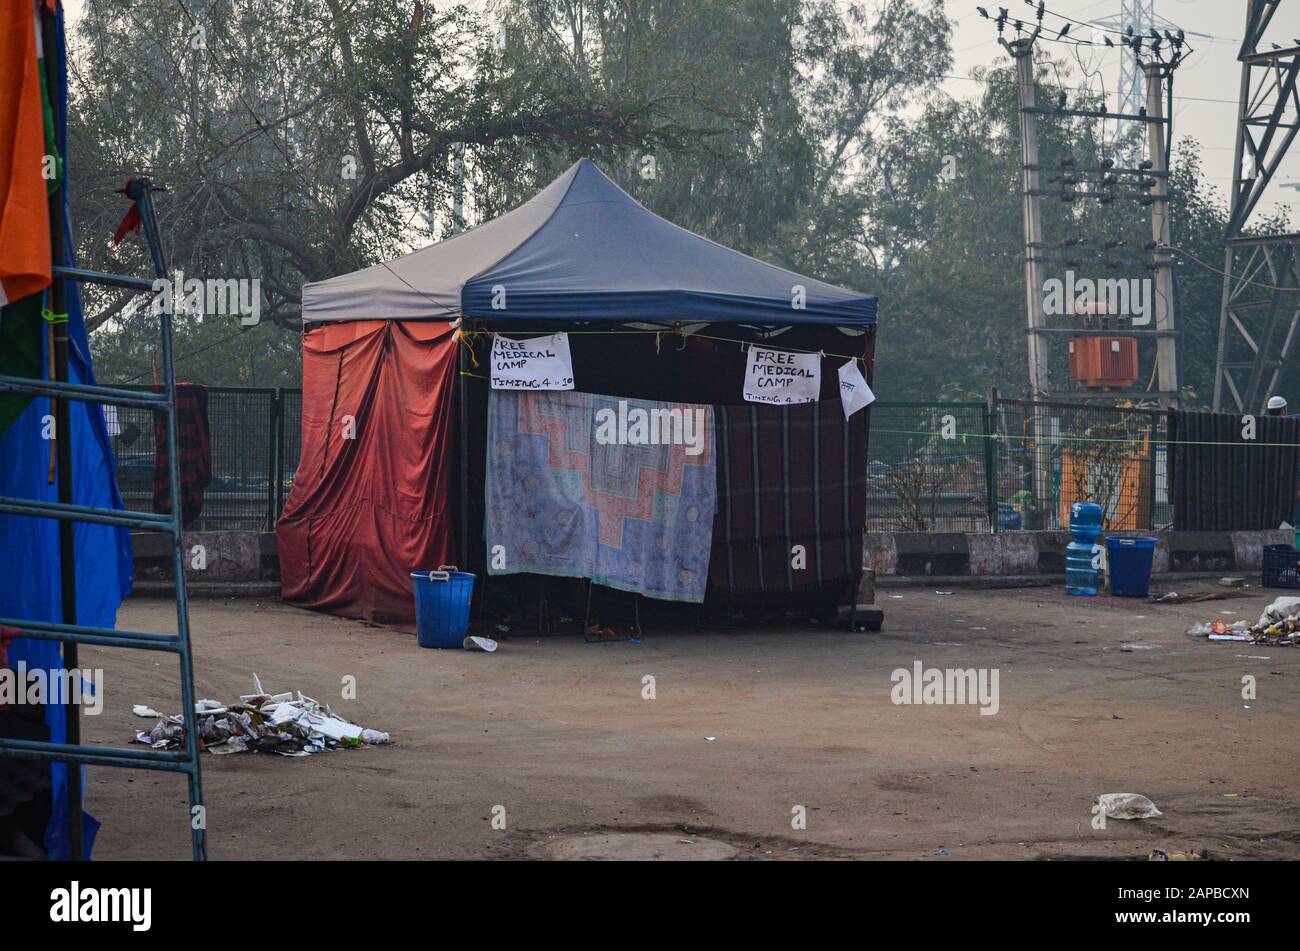 Women Protest against CAA & NRC, Shaheen Bagh, New Delhi, India- January 12, 2020: Free Medical Camp at protest site Shaheen Bagh, New Delhi, India. Stock Photo